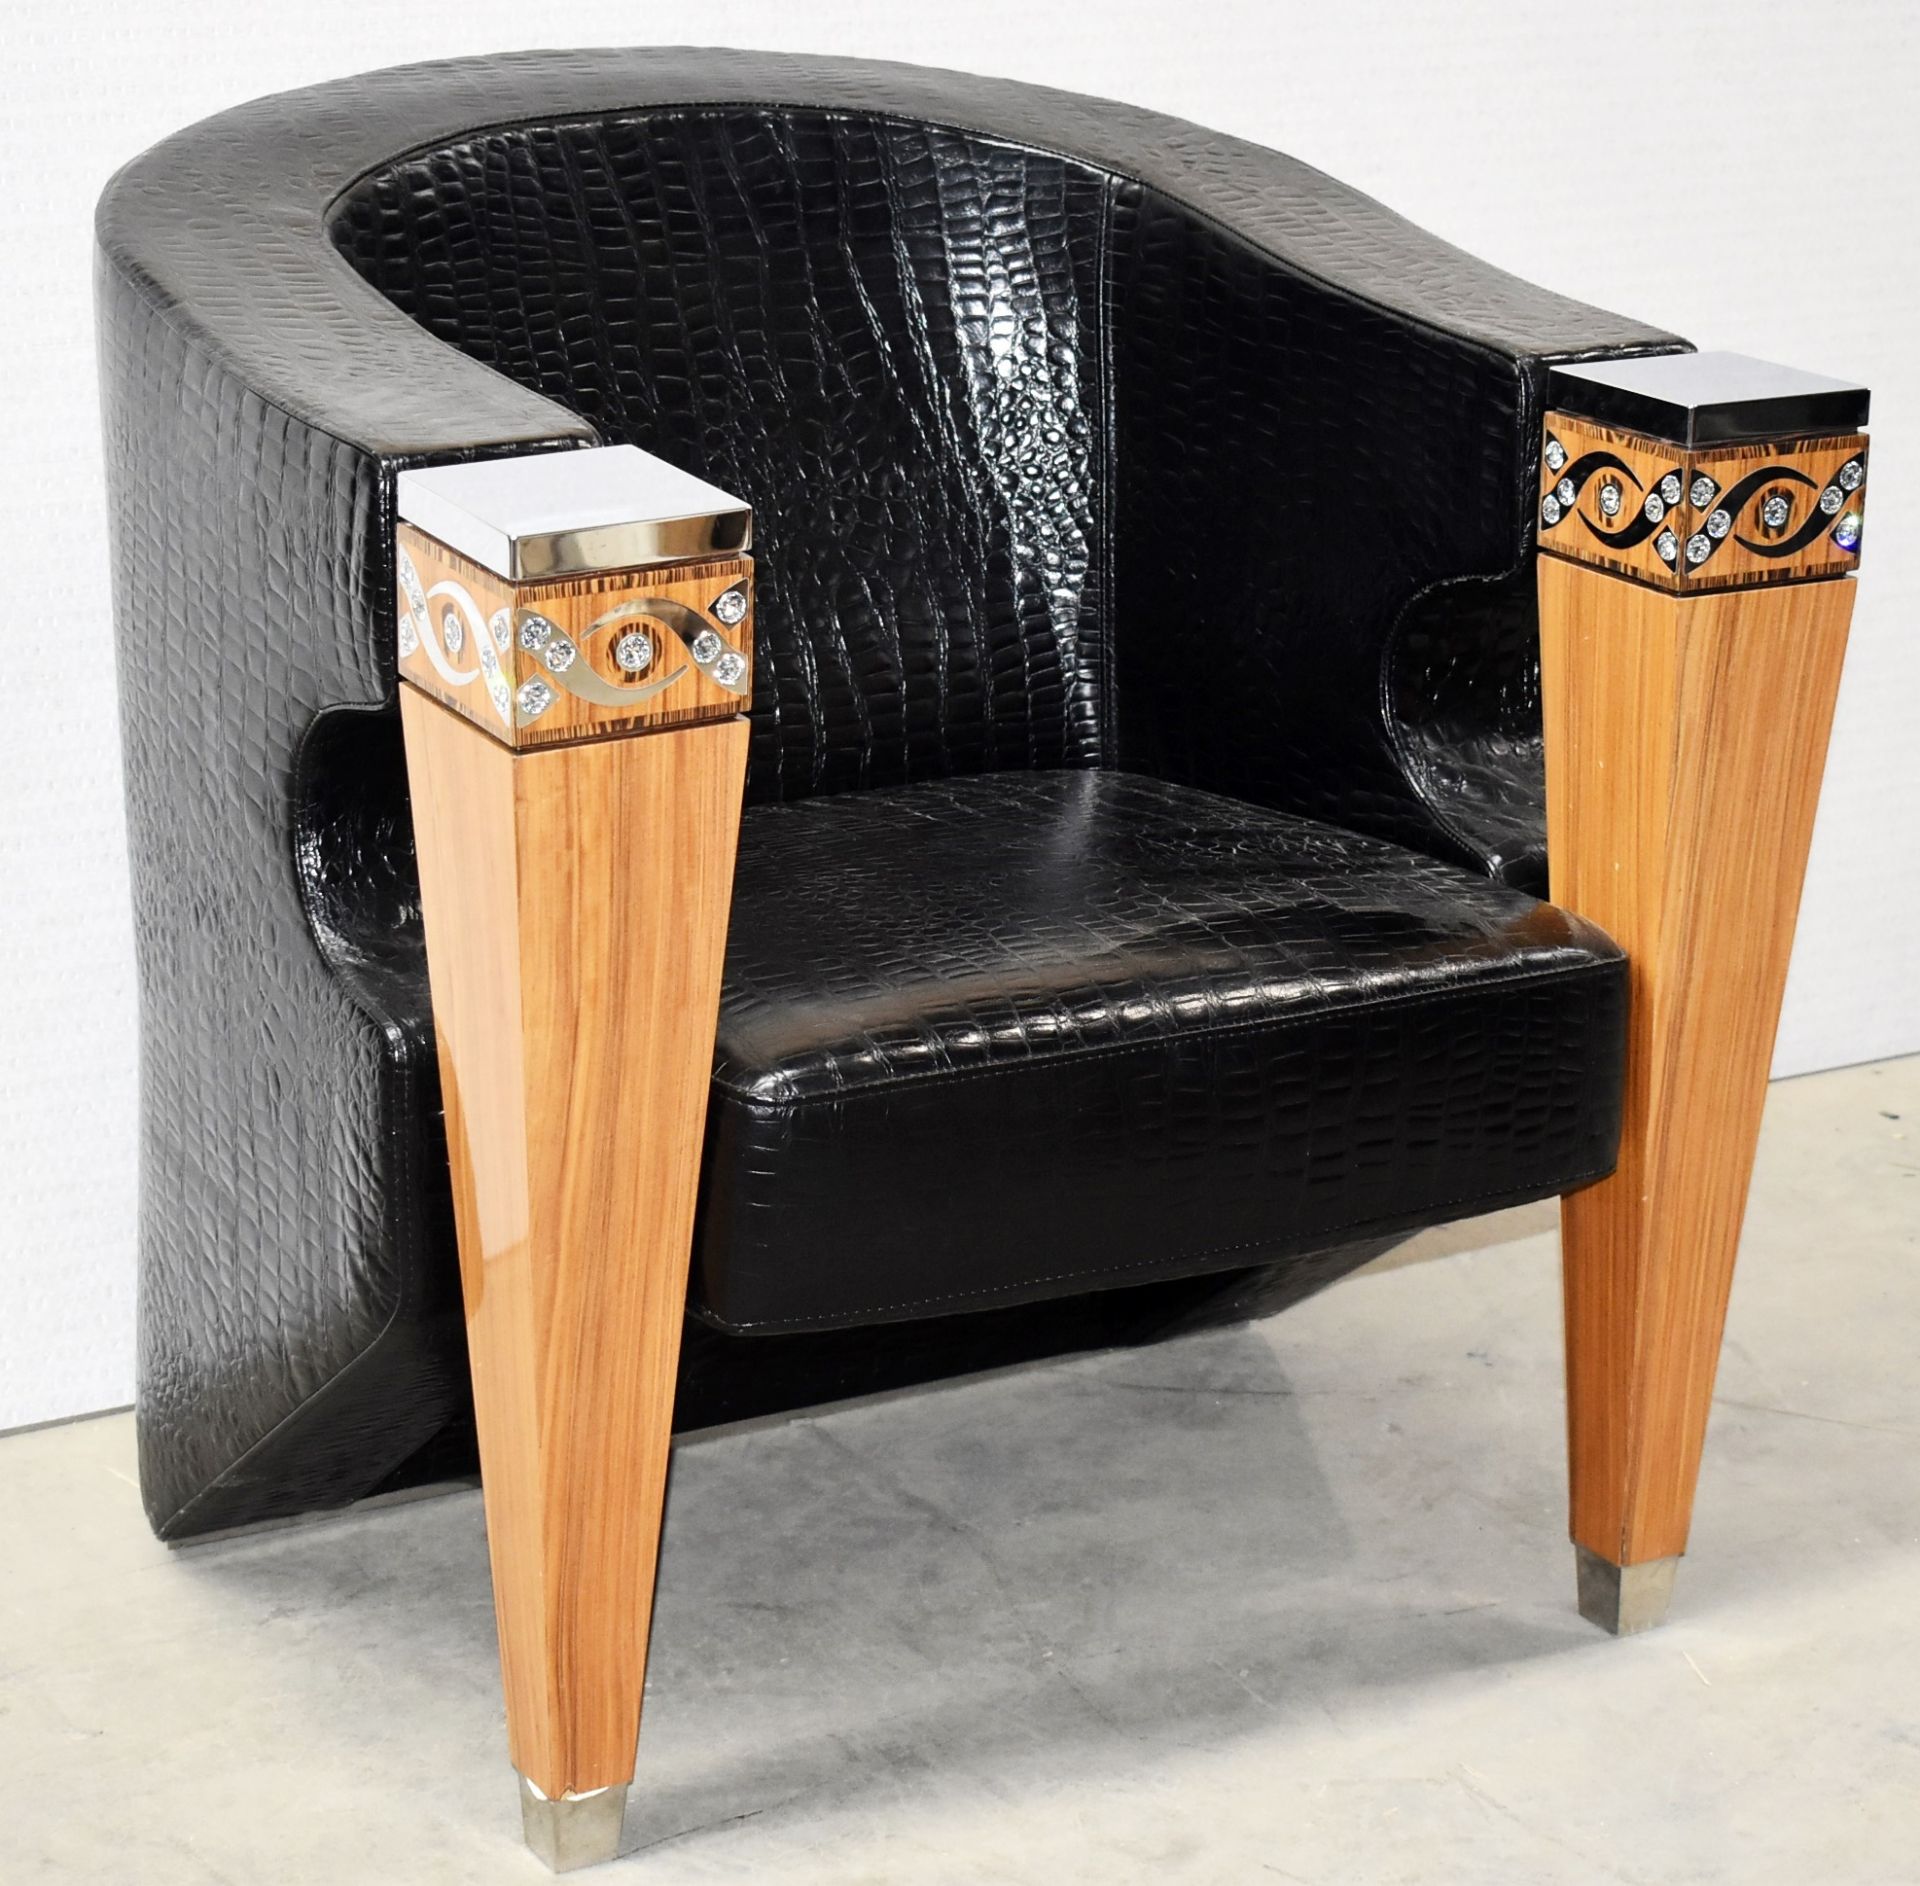 1 x Bespoke Art Deco Black 'Crocodile Skin' Armchair Wooden Arms Embellished With Crystal & Silver